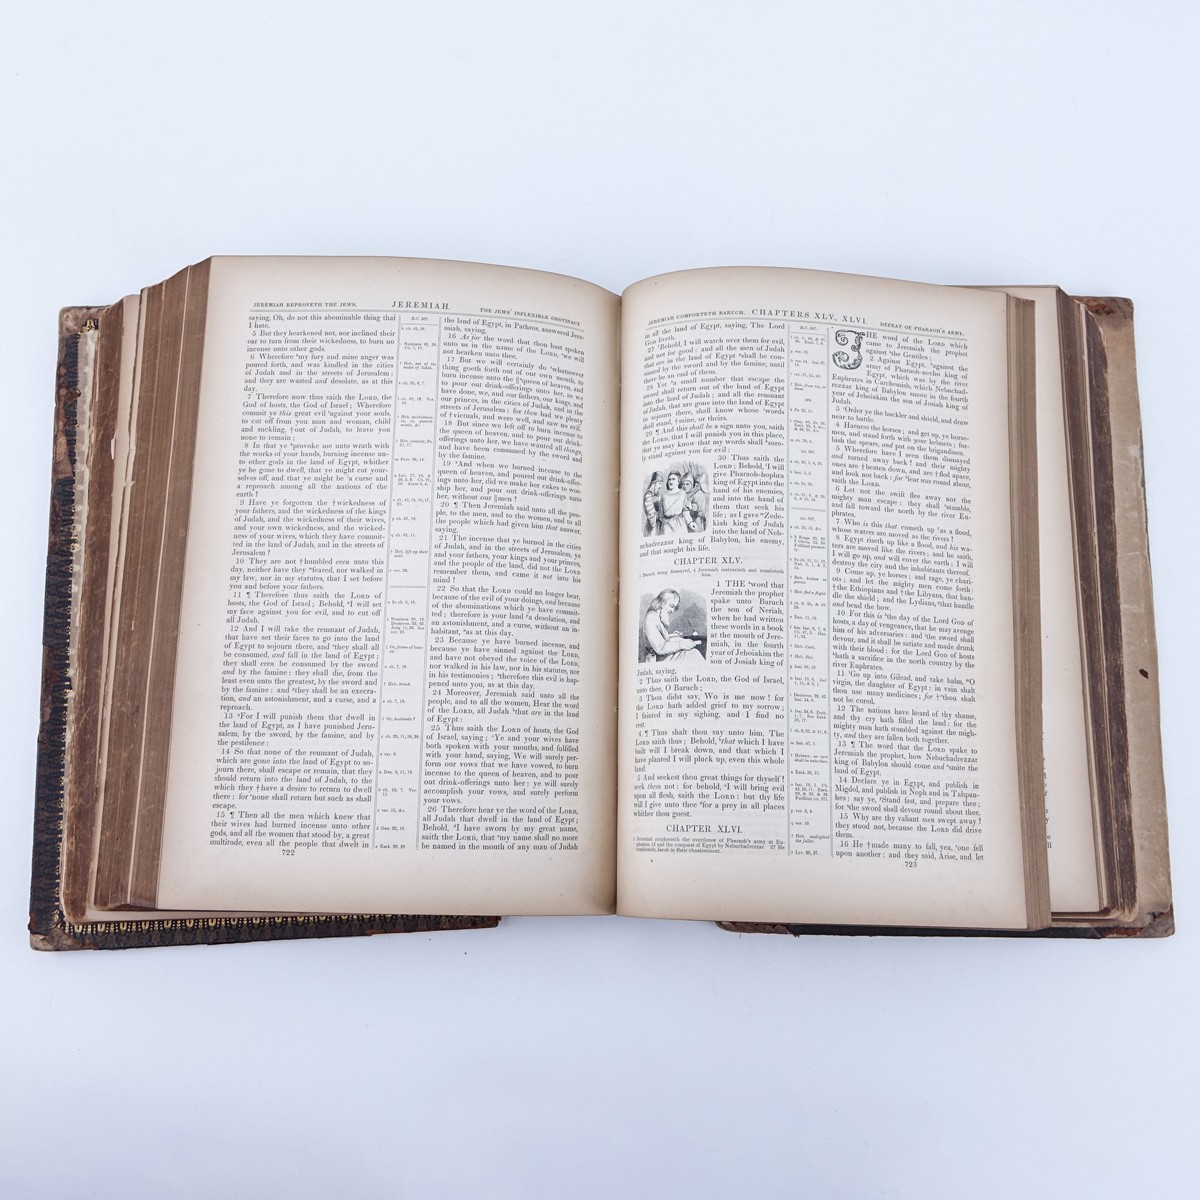 Harper and Brothers, Publishers, New York, 1846, Large Leather Bound Illuminated Bible. Includes the Old and New Testaments, and the Apocrypha, with the number of their chapters.